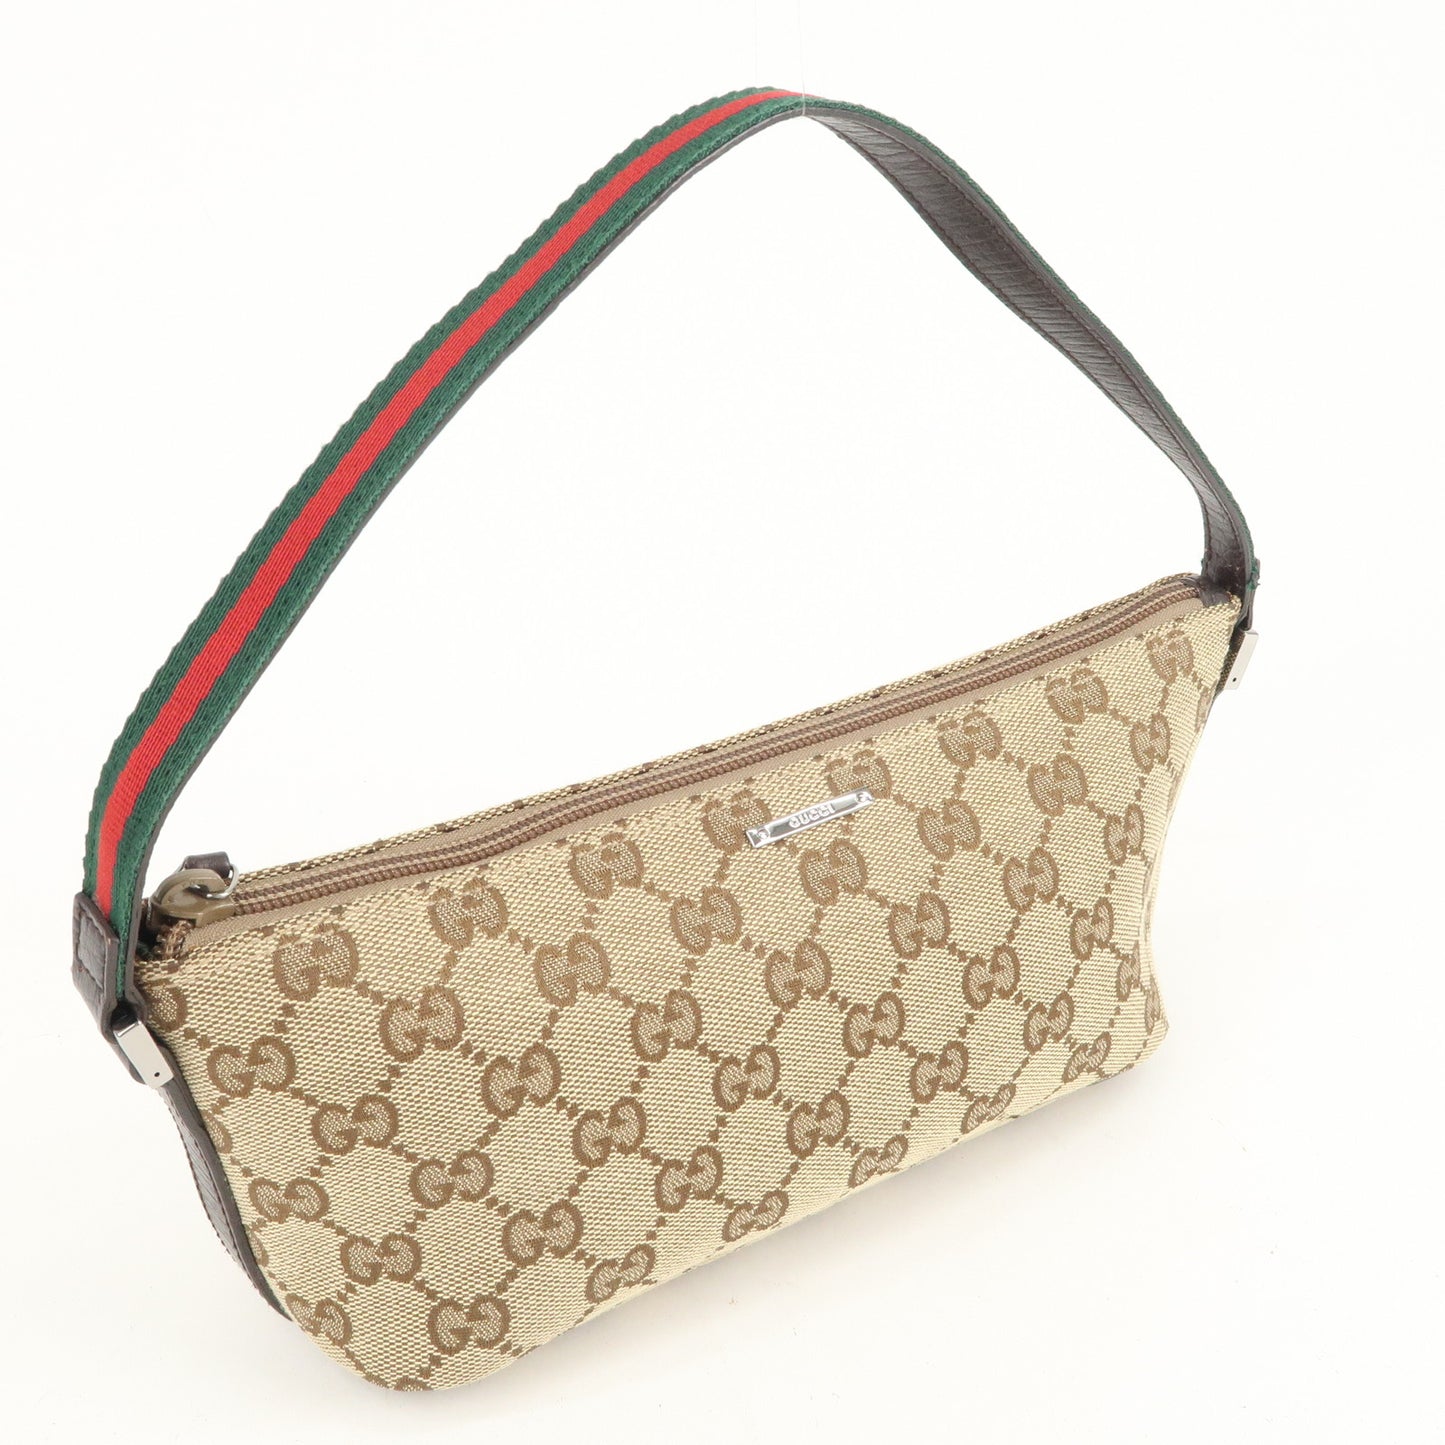 Pouch - ep_vintage luxury Store - Bag - Canvas - GG - 141809 – dct - Gucci  GG Supreme bags - Leather - Boat - Beige - GUCCI - Sherry